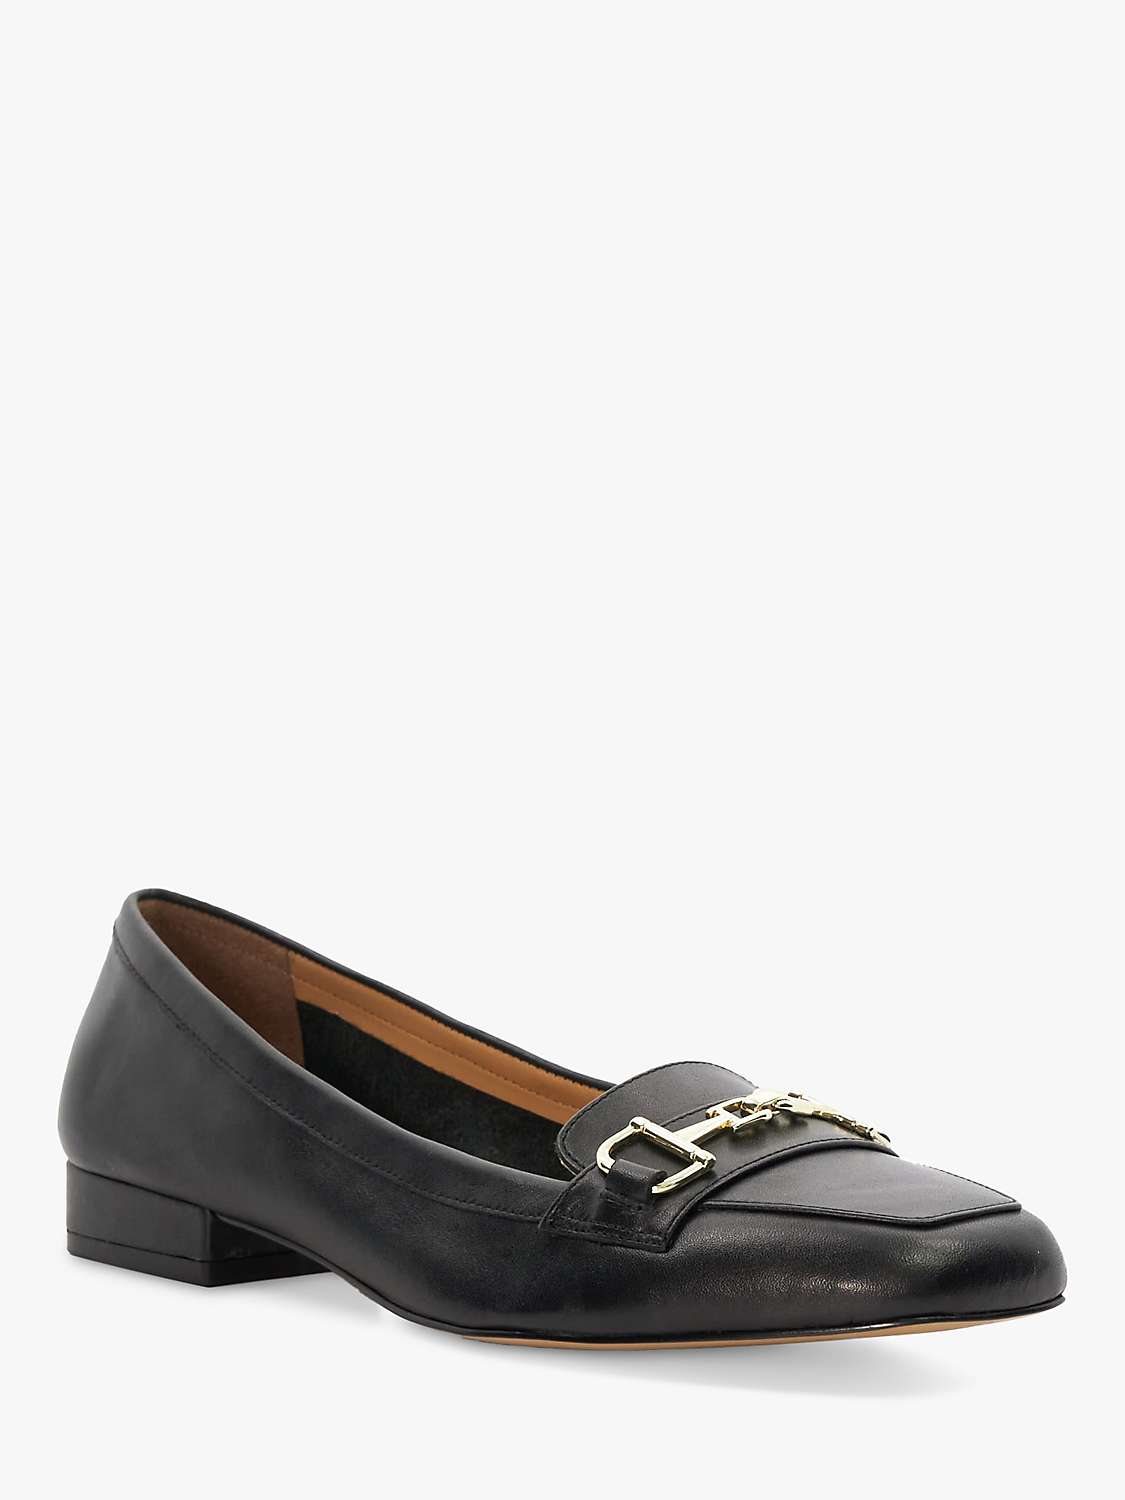 Buy Dune Graice Leather Loafers Online at johnlewis.com